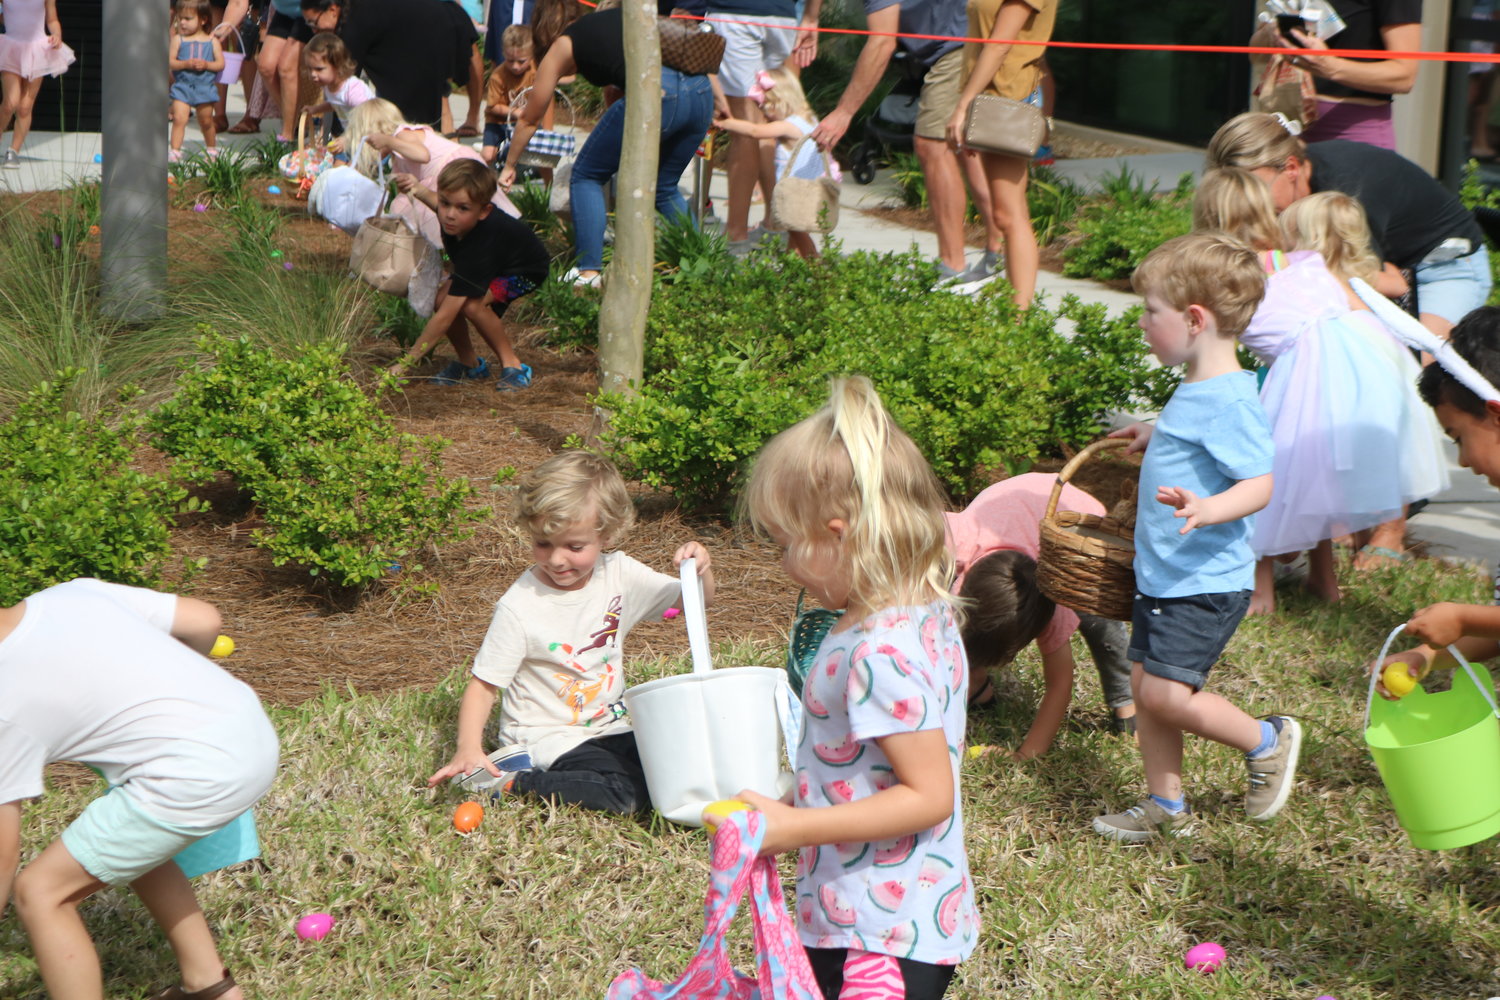 Children search for eggs during the Easter egg hunt.